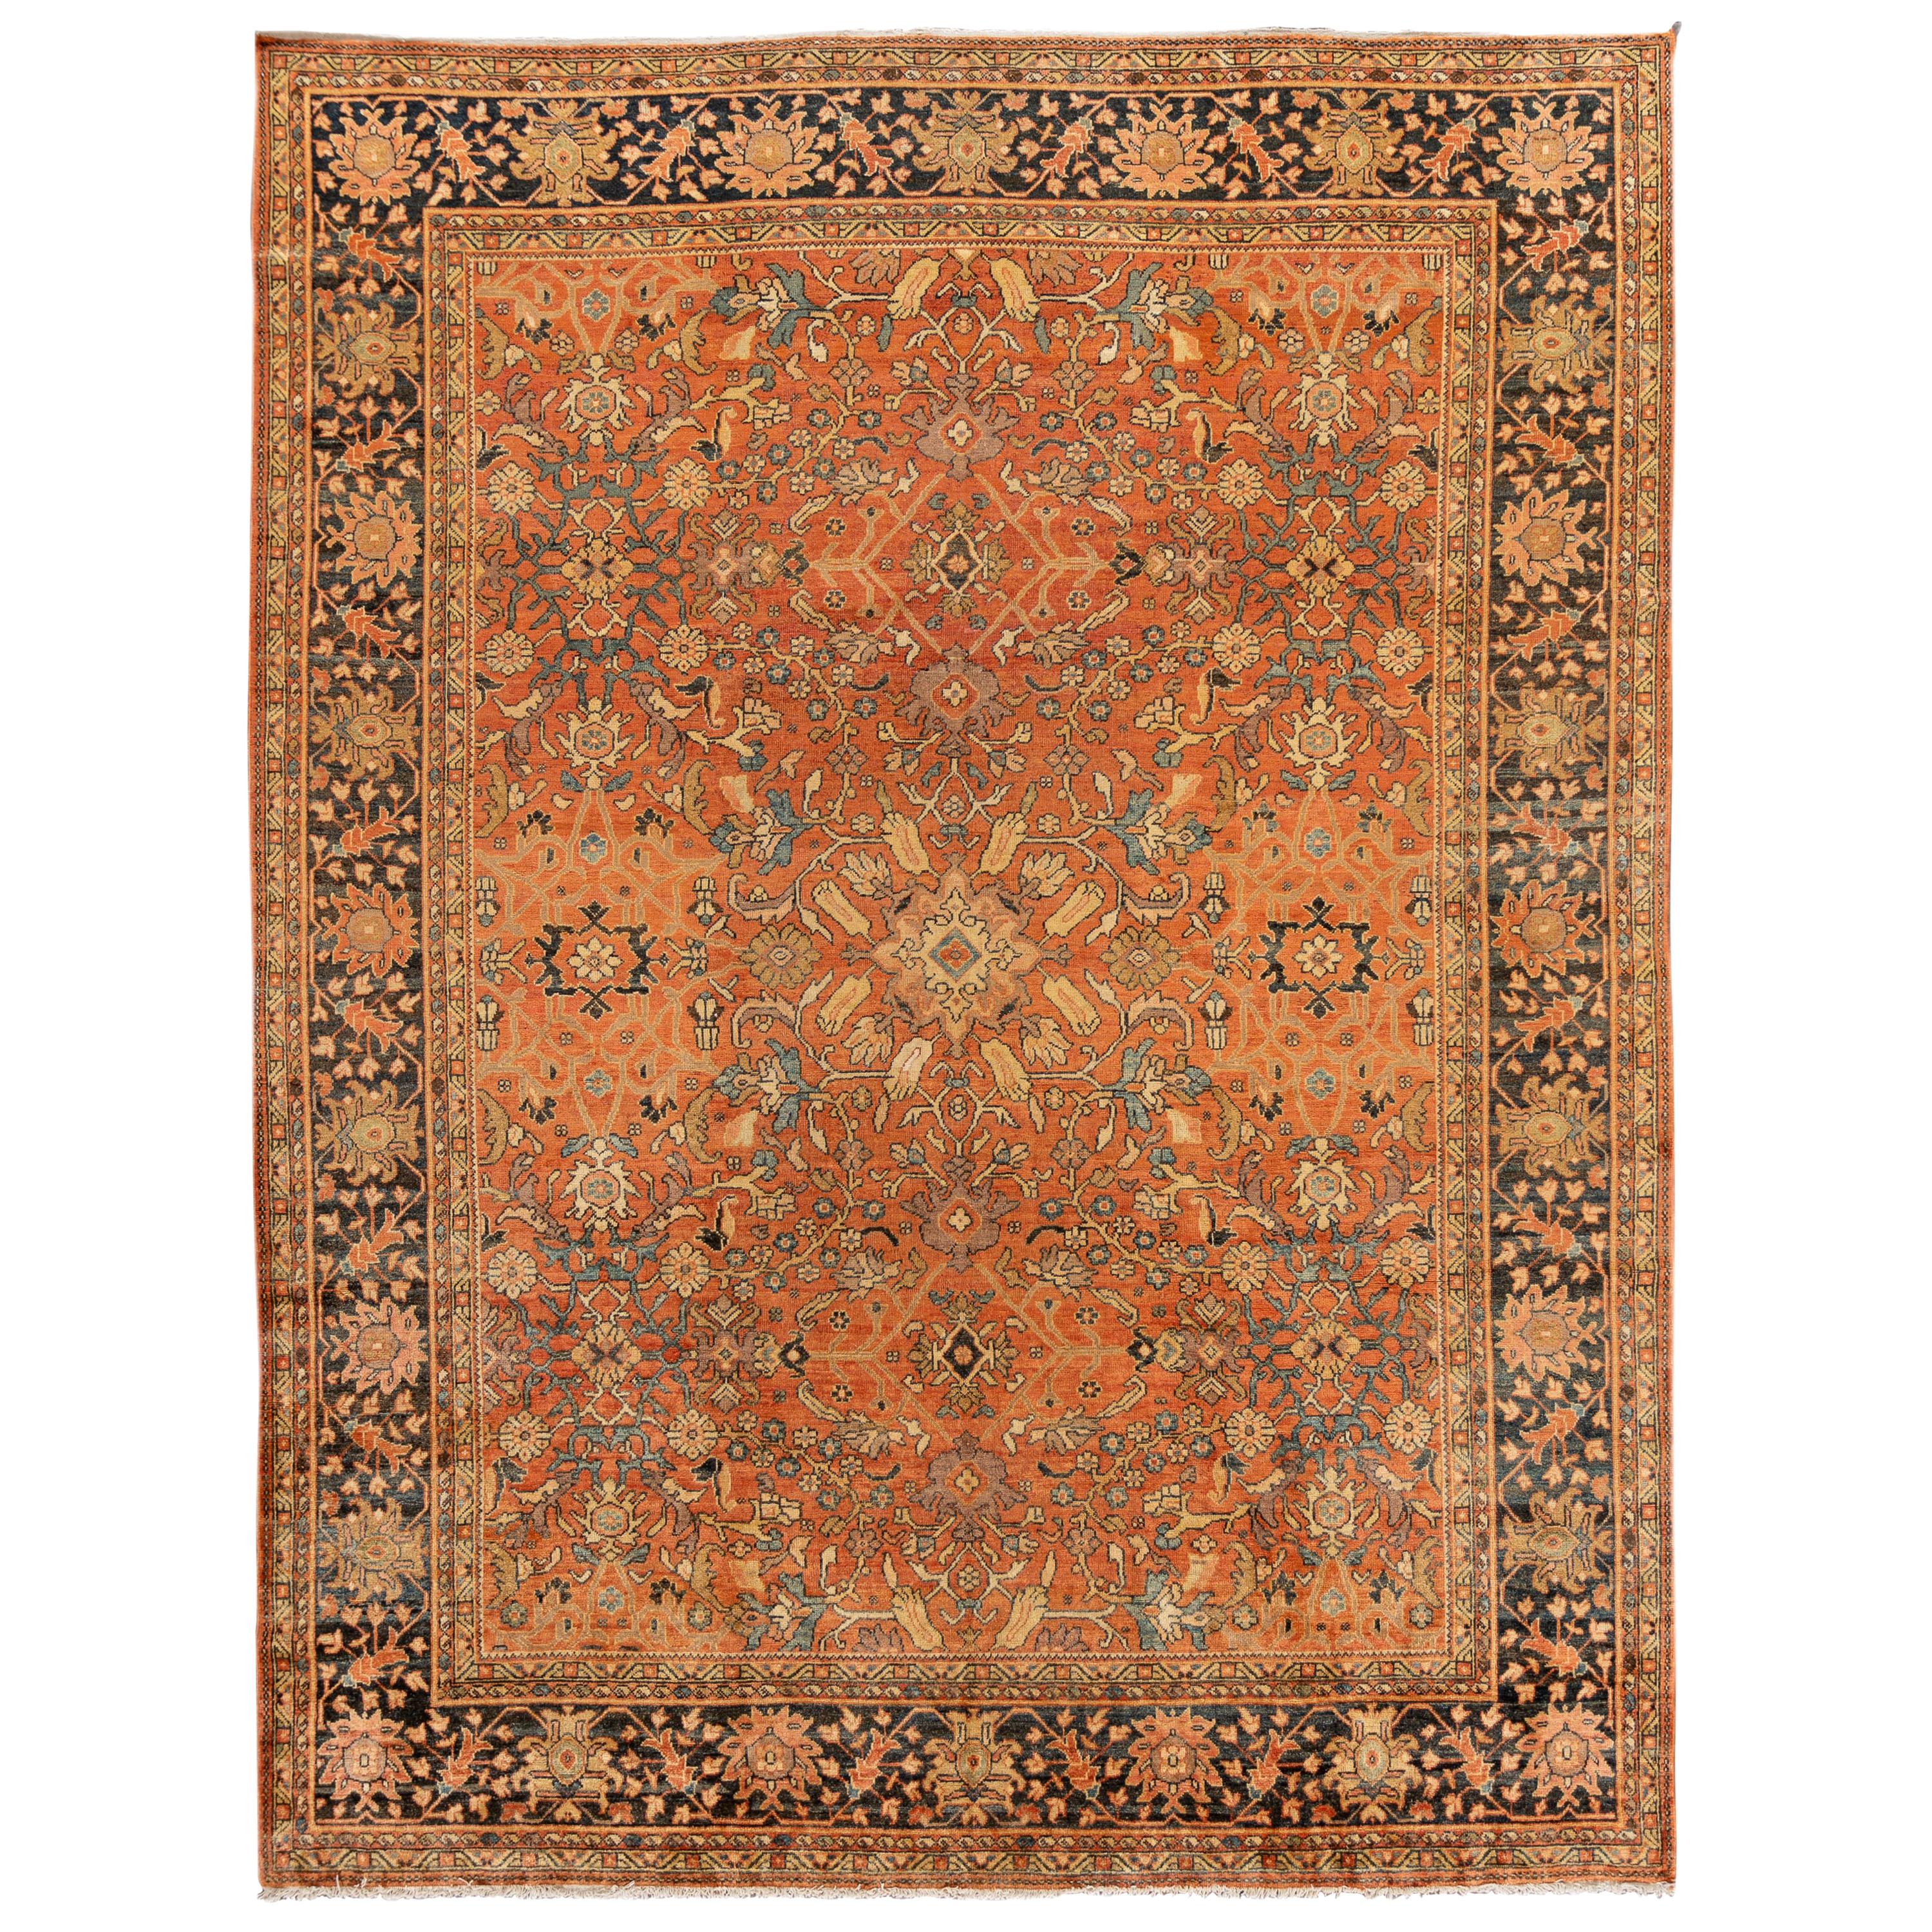 Early 20th Century Antique Mahal Wool Rug